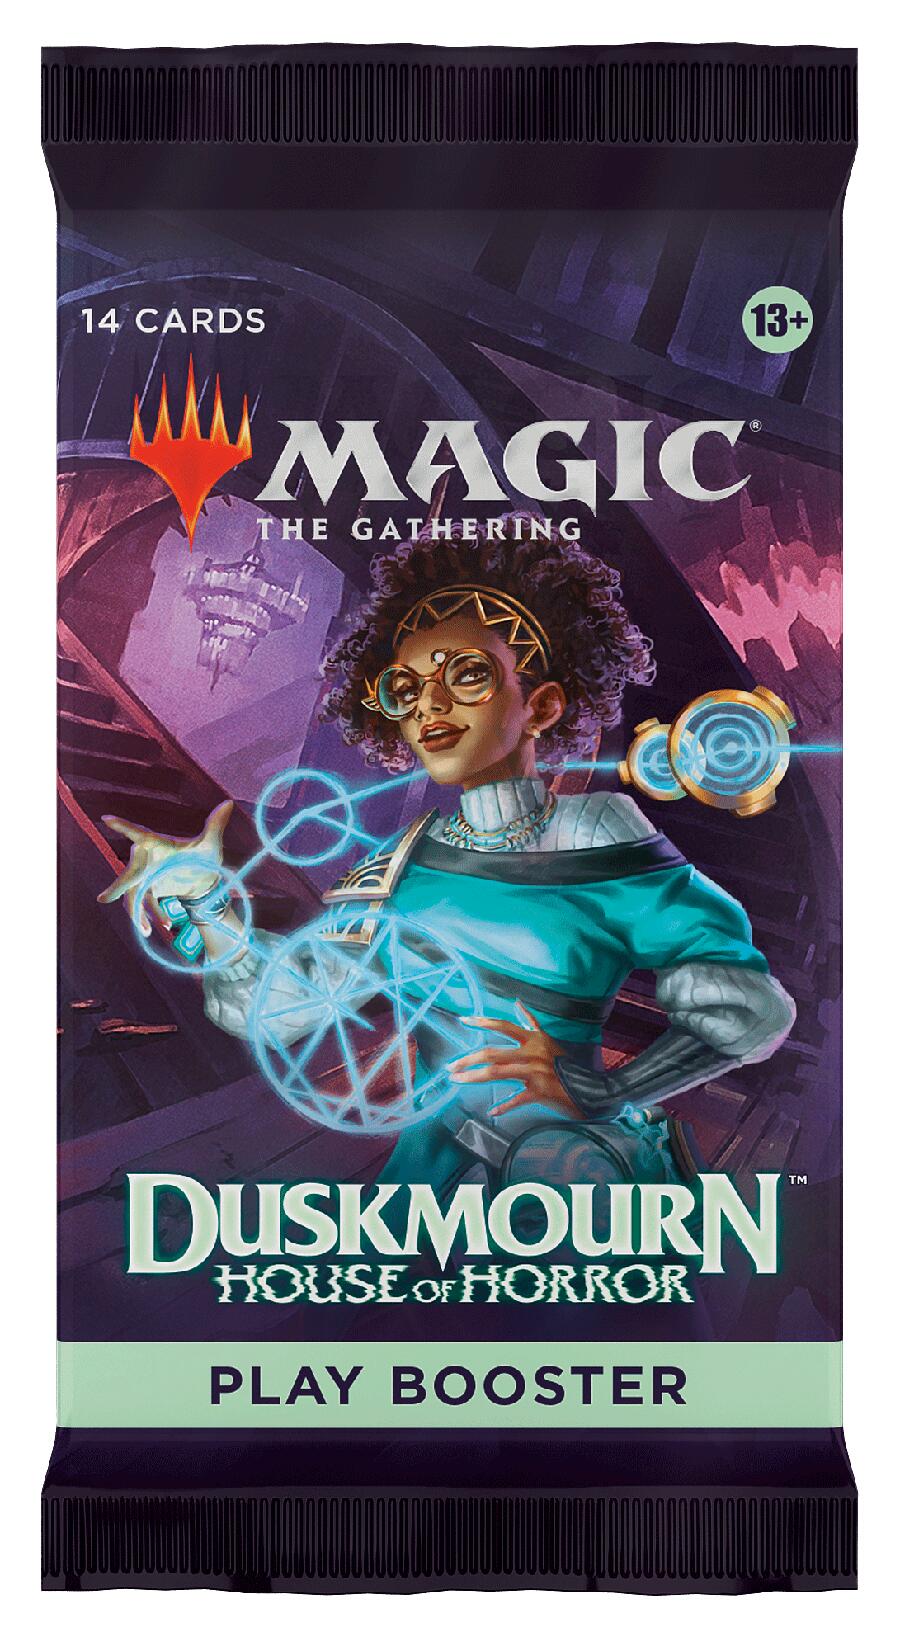 Duskmourn: House of Horror - Play Booster PRE-ORDER 27 SEP